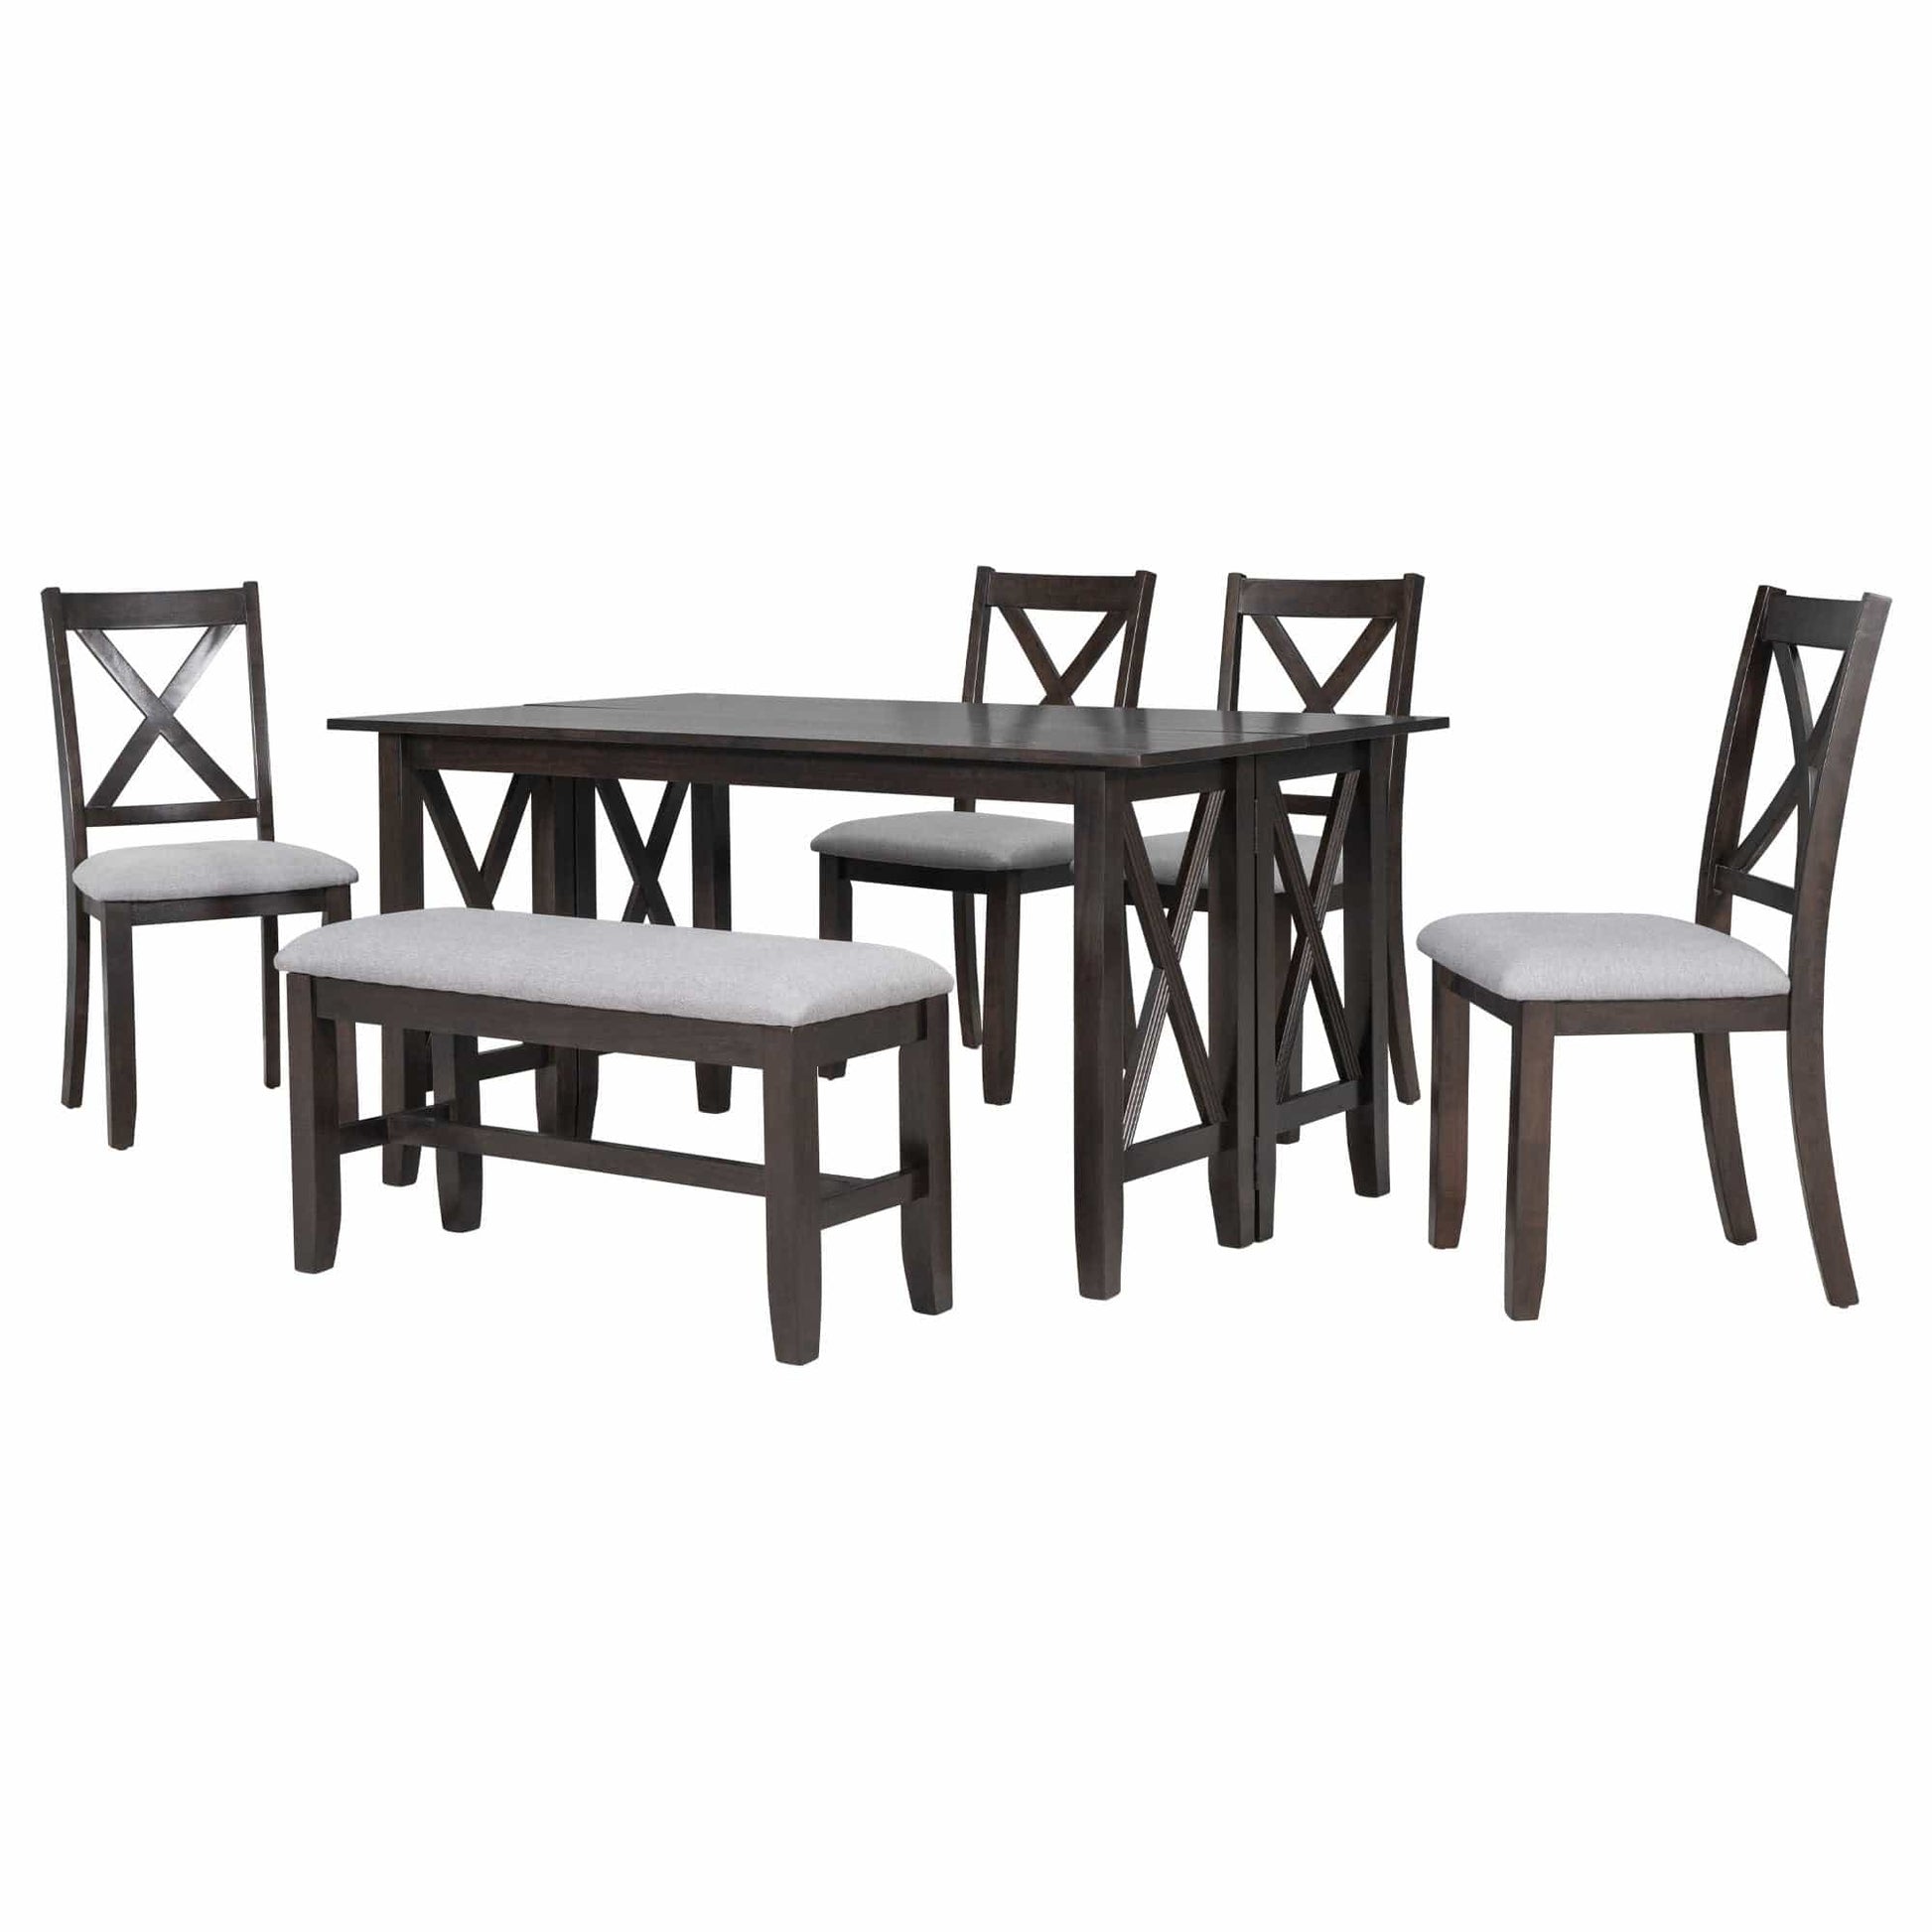 1st Choice Furniture Direct Dining Set 1st Choice 6 Piece Family Dining Room Set with Table, 4 Chairs, Bench